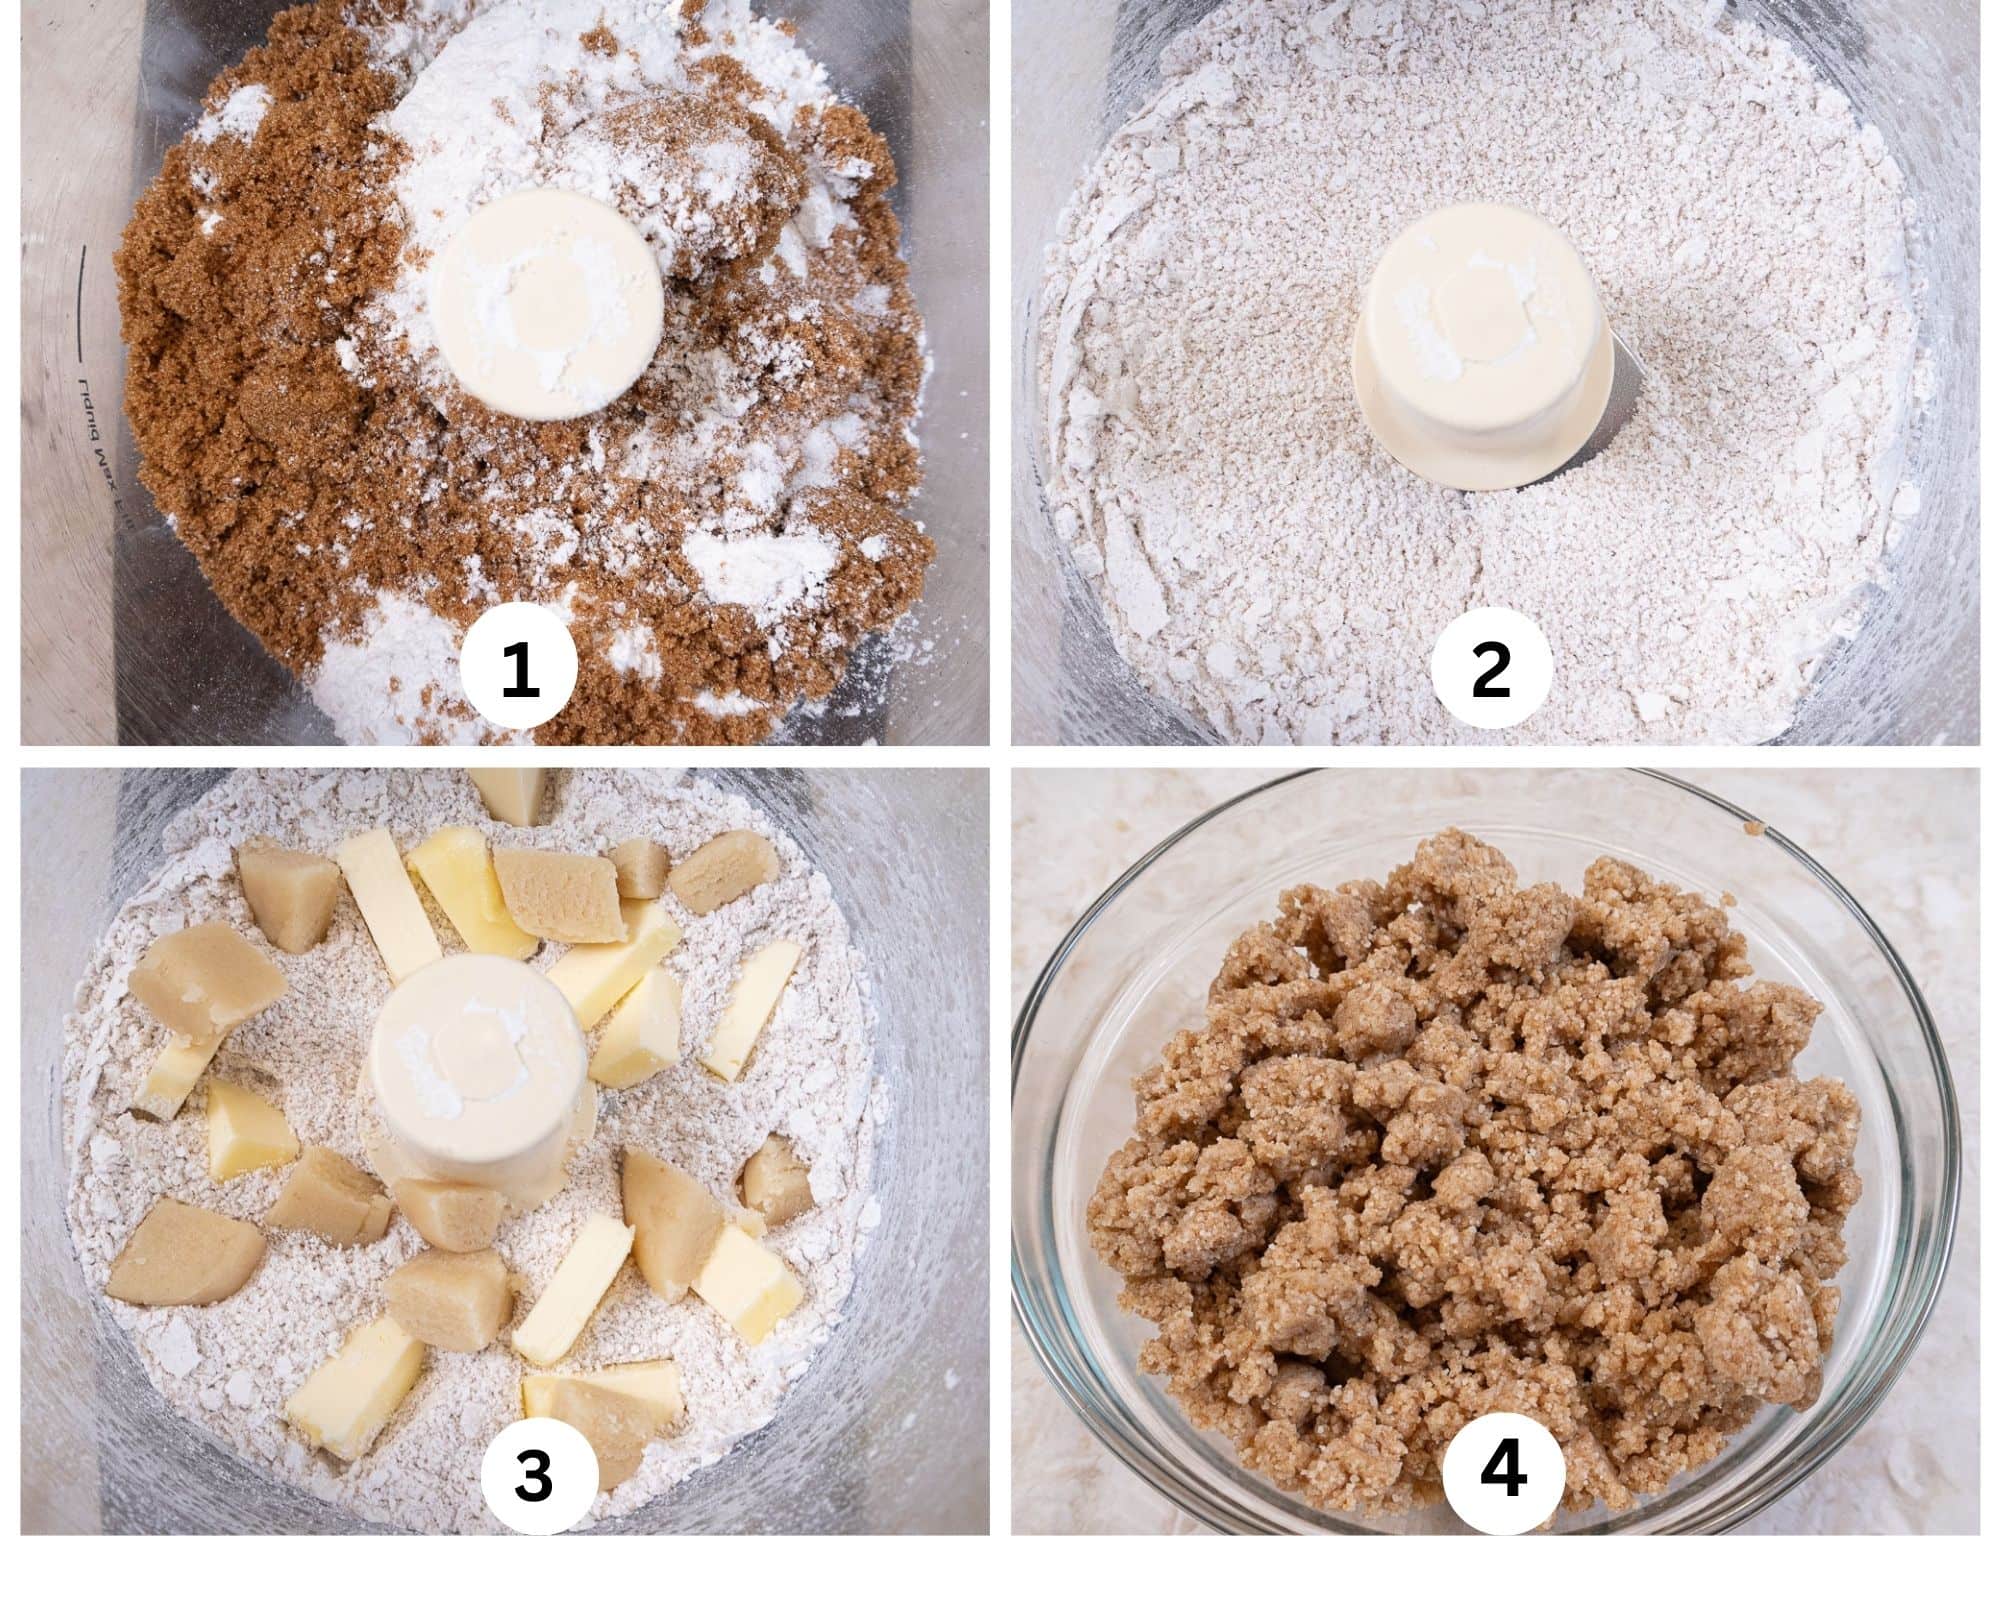 The first collage shows the dry ingredients for the brown sugar almond crumble in the processor.